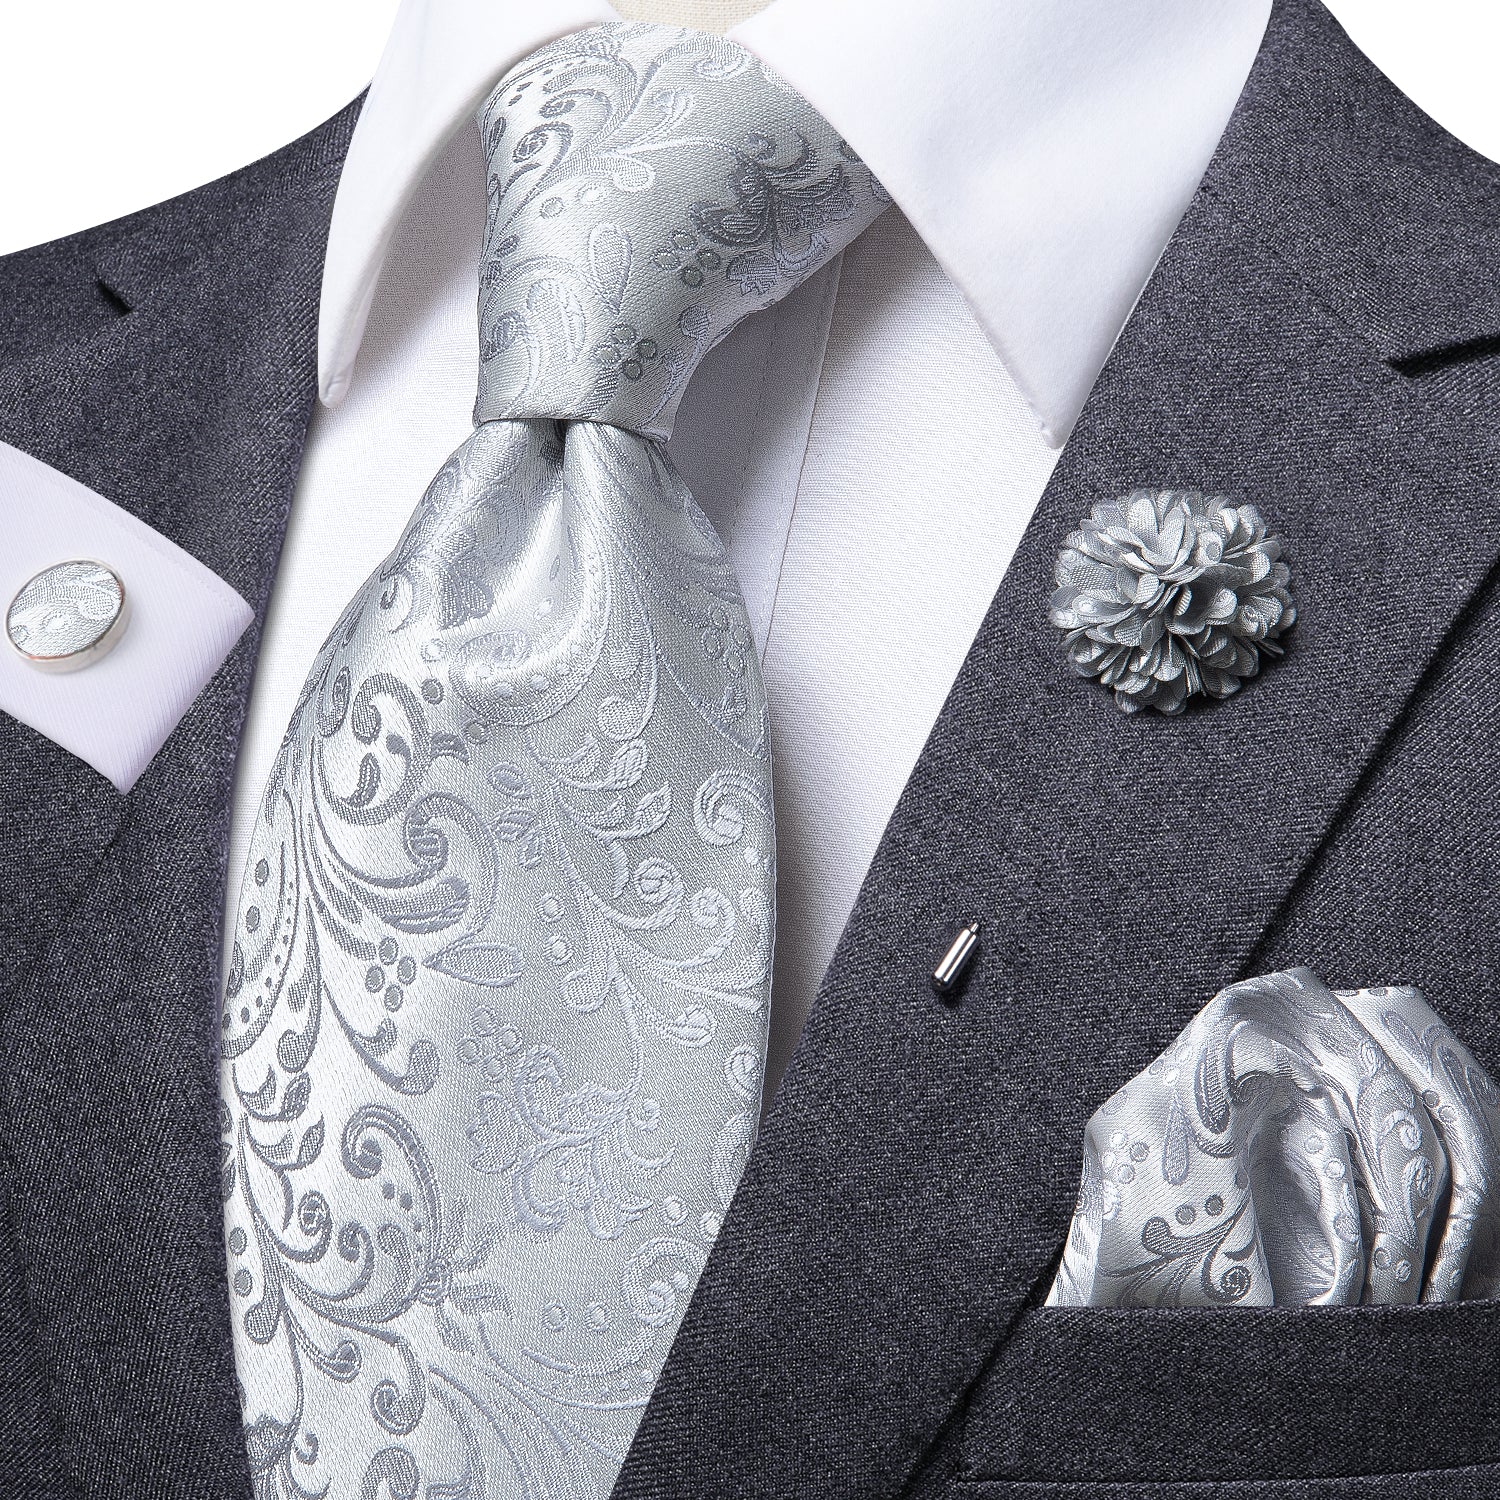 Silver Floral Tie Pocket Square Cufflinks Set with Brooch